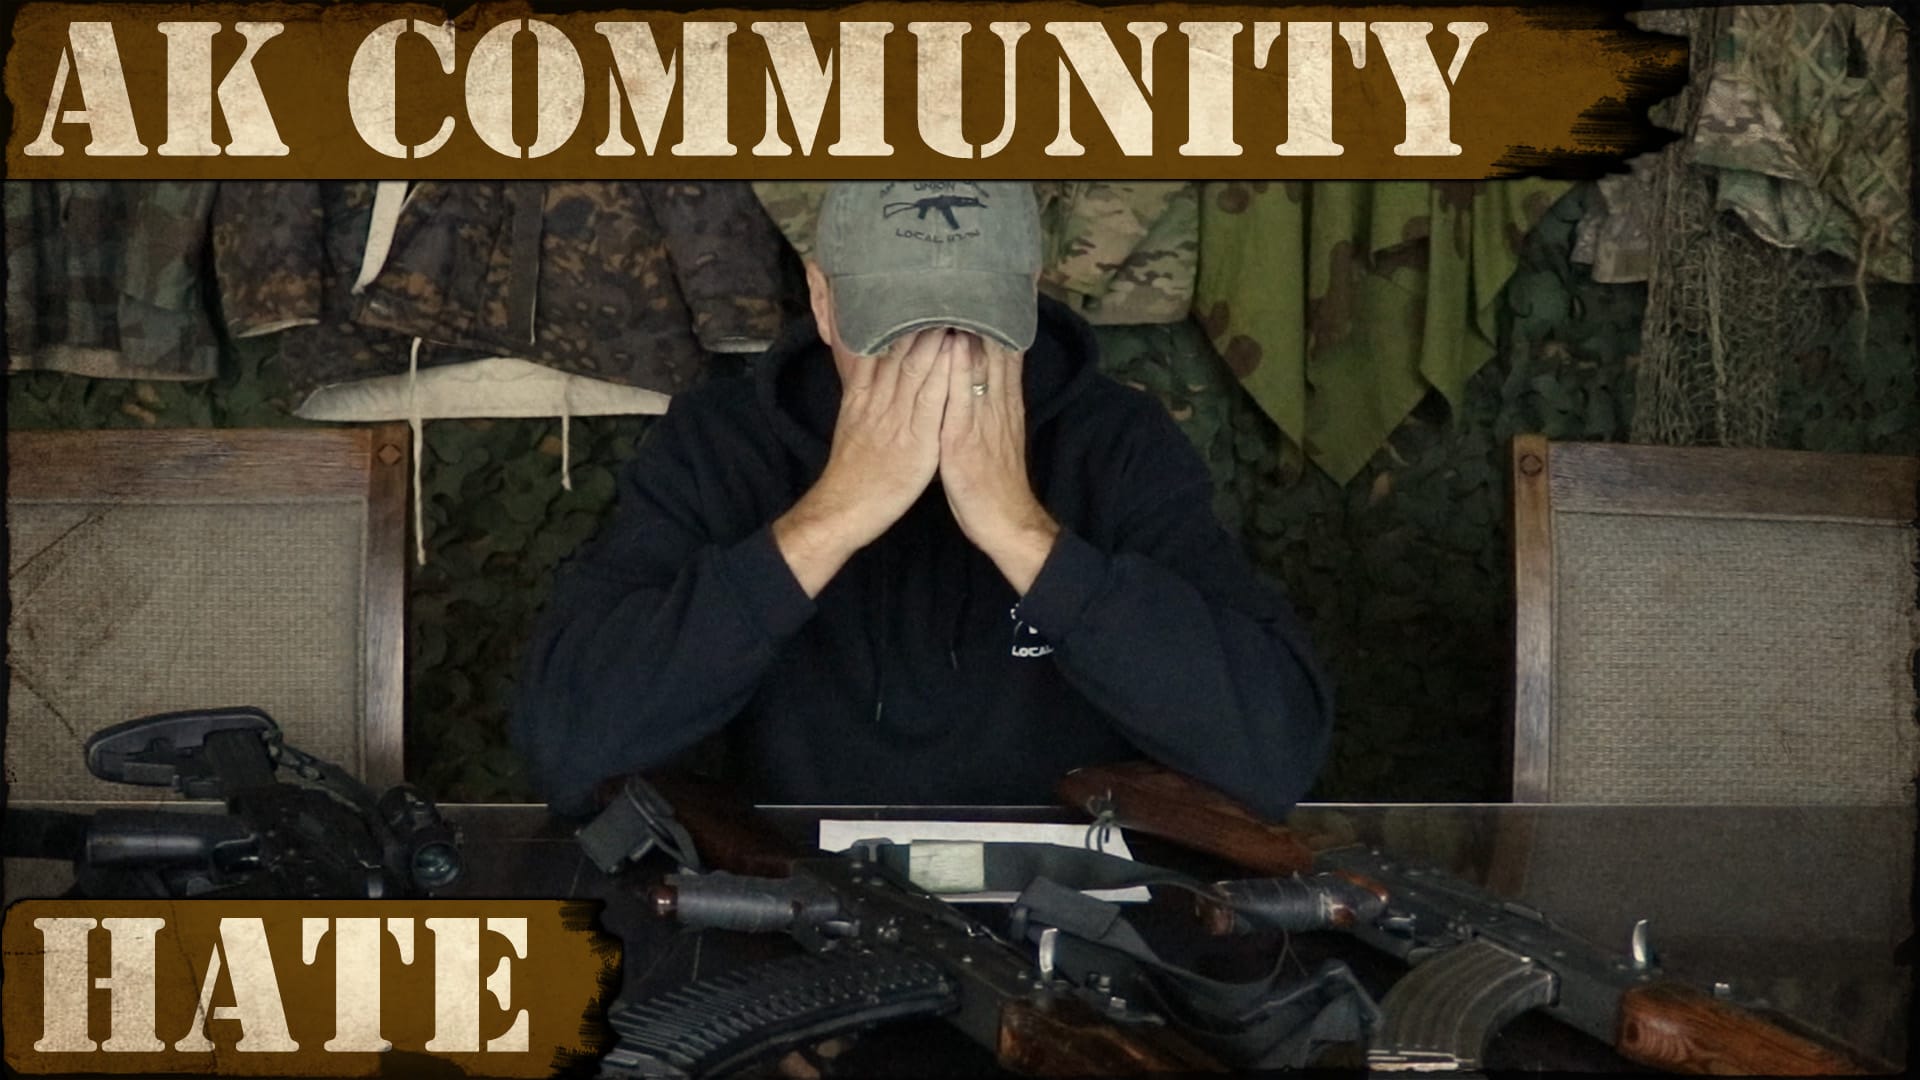 AK Community Hate – We hate on everyone and everything!